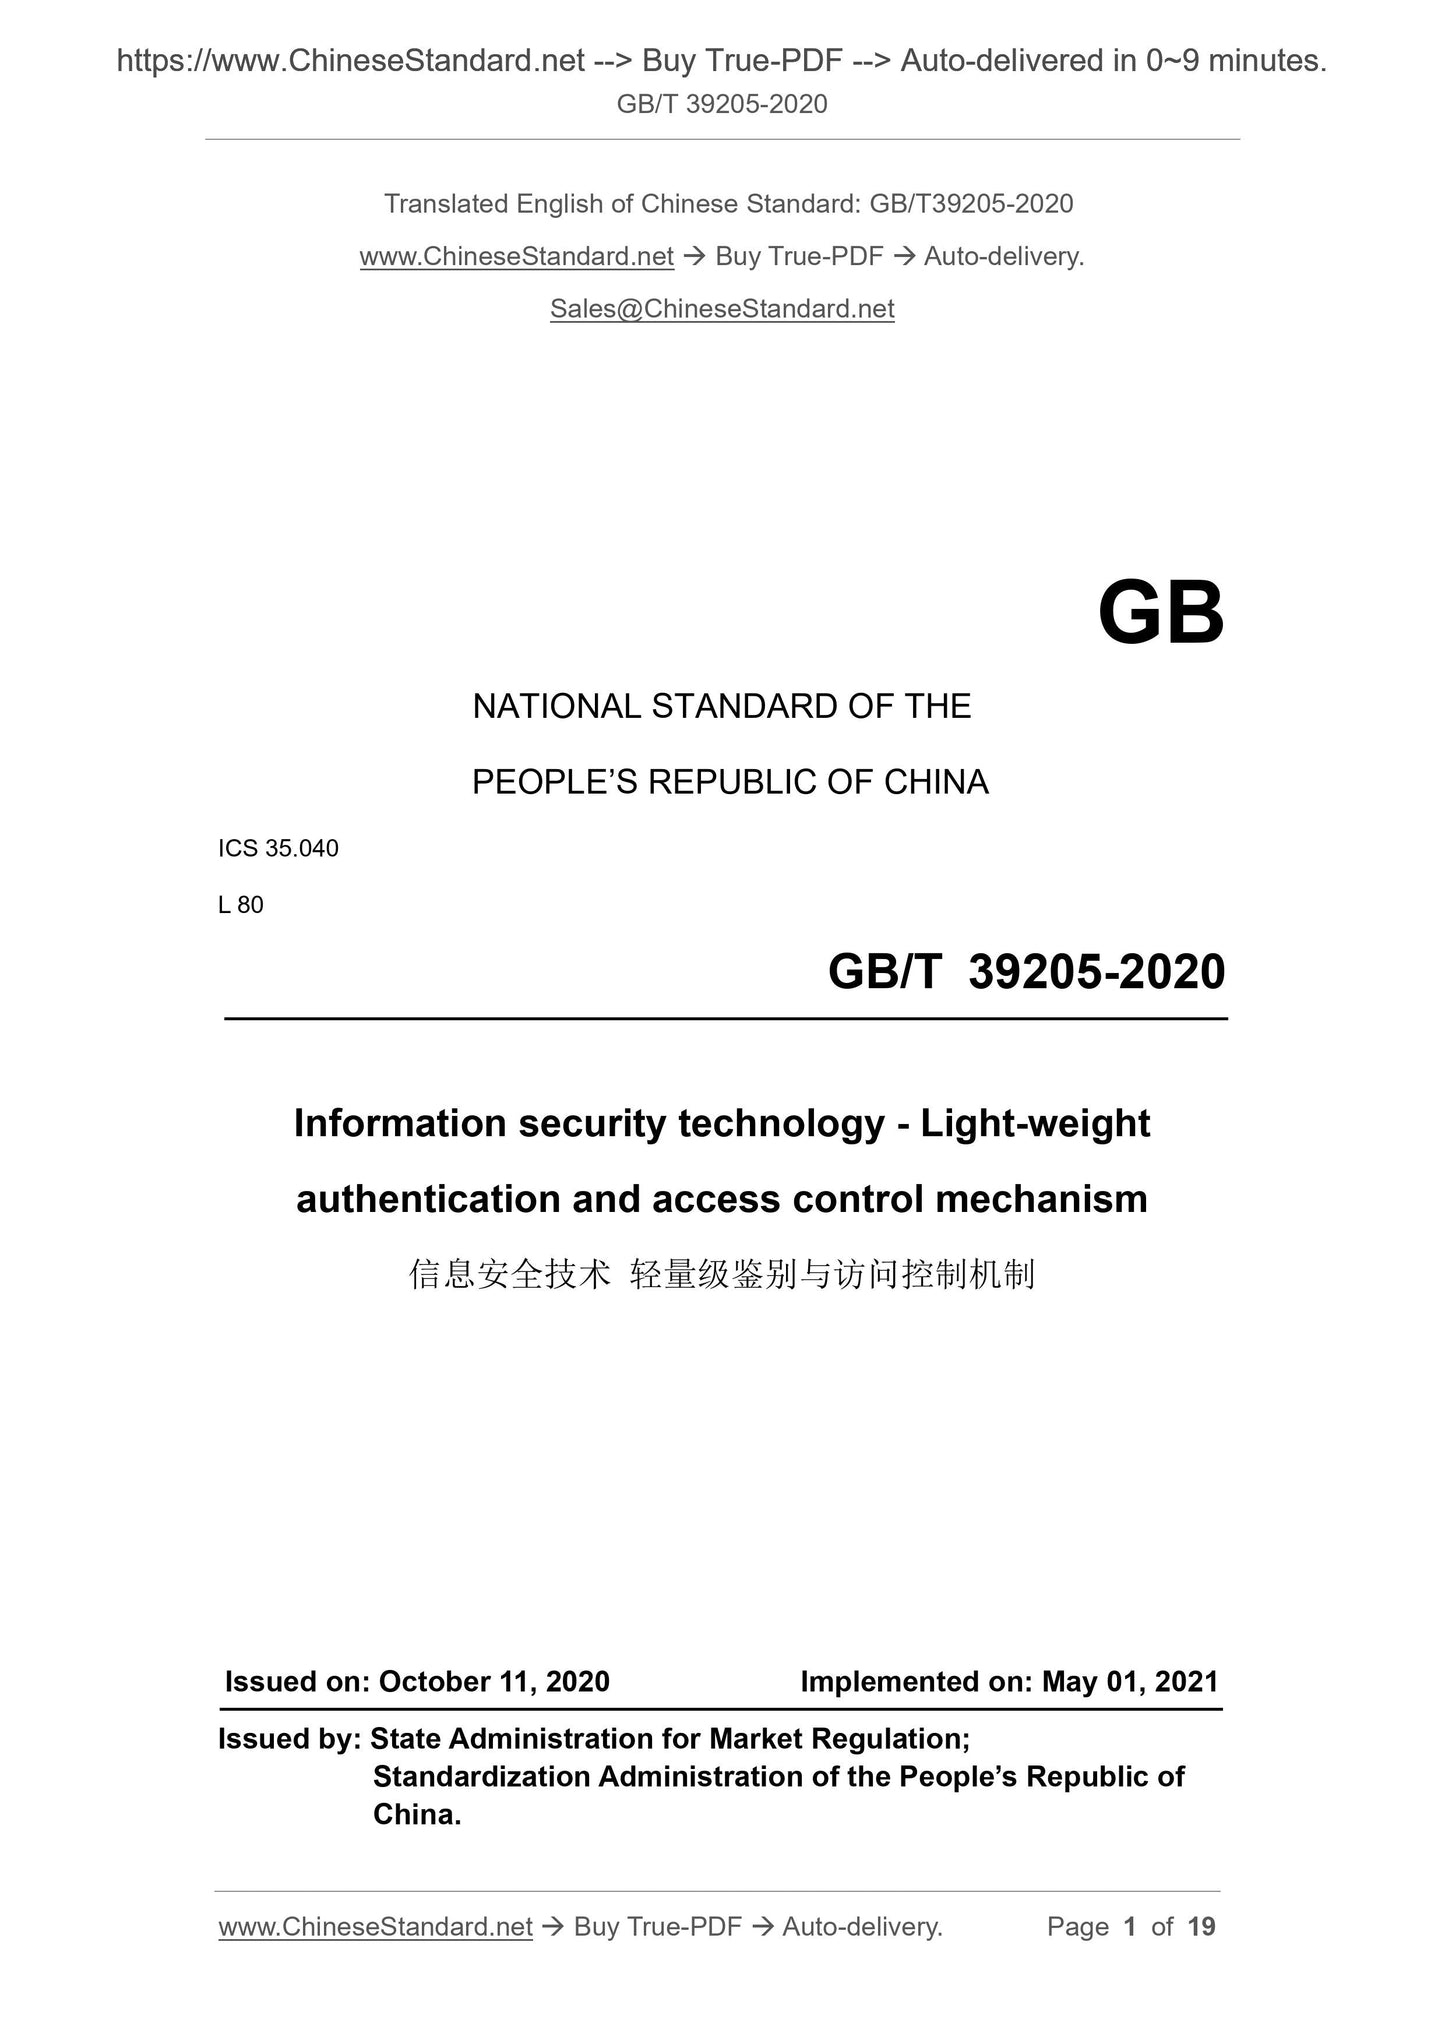 GB/T 39205-2020 Page 1